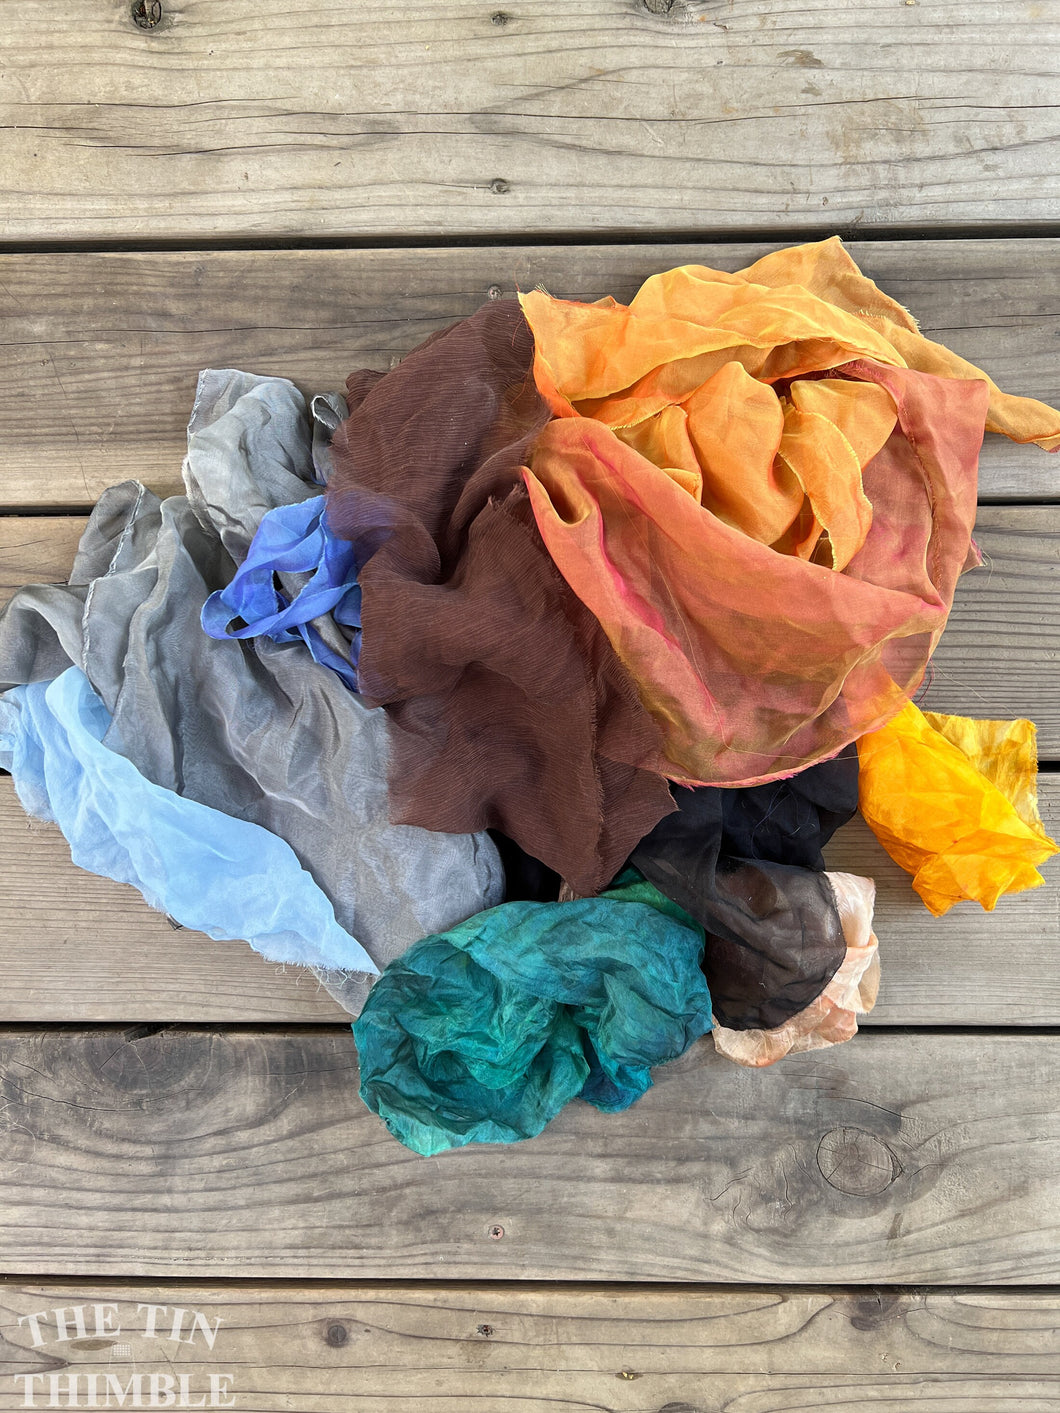 2 Ounces of 100% Pure Silk Scraps - Vintage, New, Hand Dyed Assortment of Silk Weights and Weaves - Great for Collage, Nuno and Wet Felting